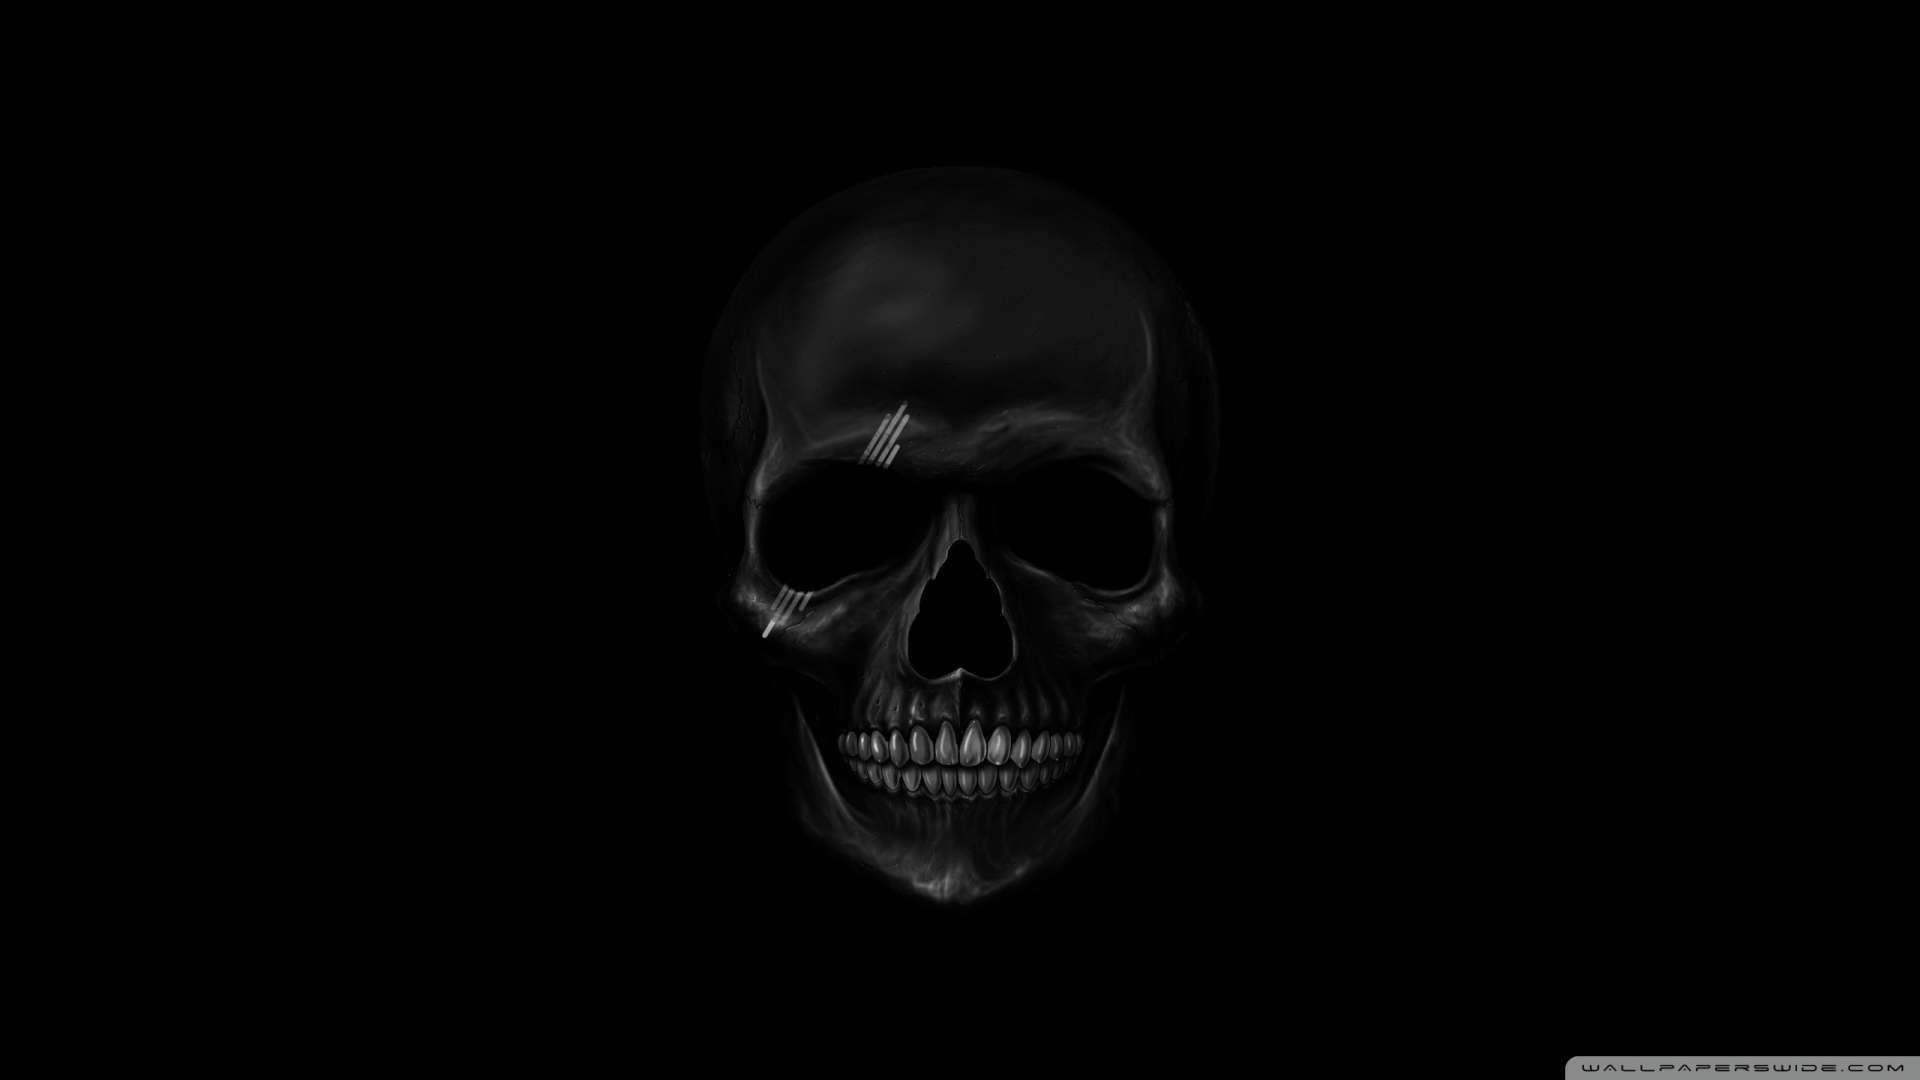 Awesome Black Wallpaper HD 1080p Image Skulls In